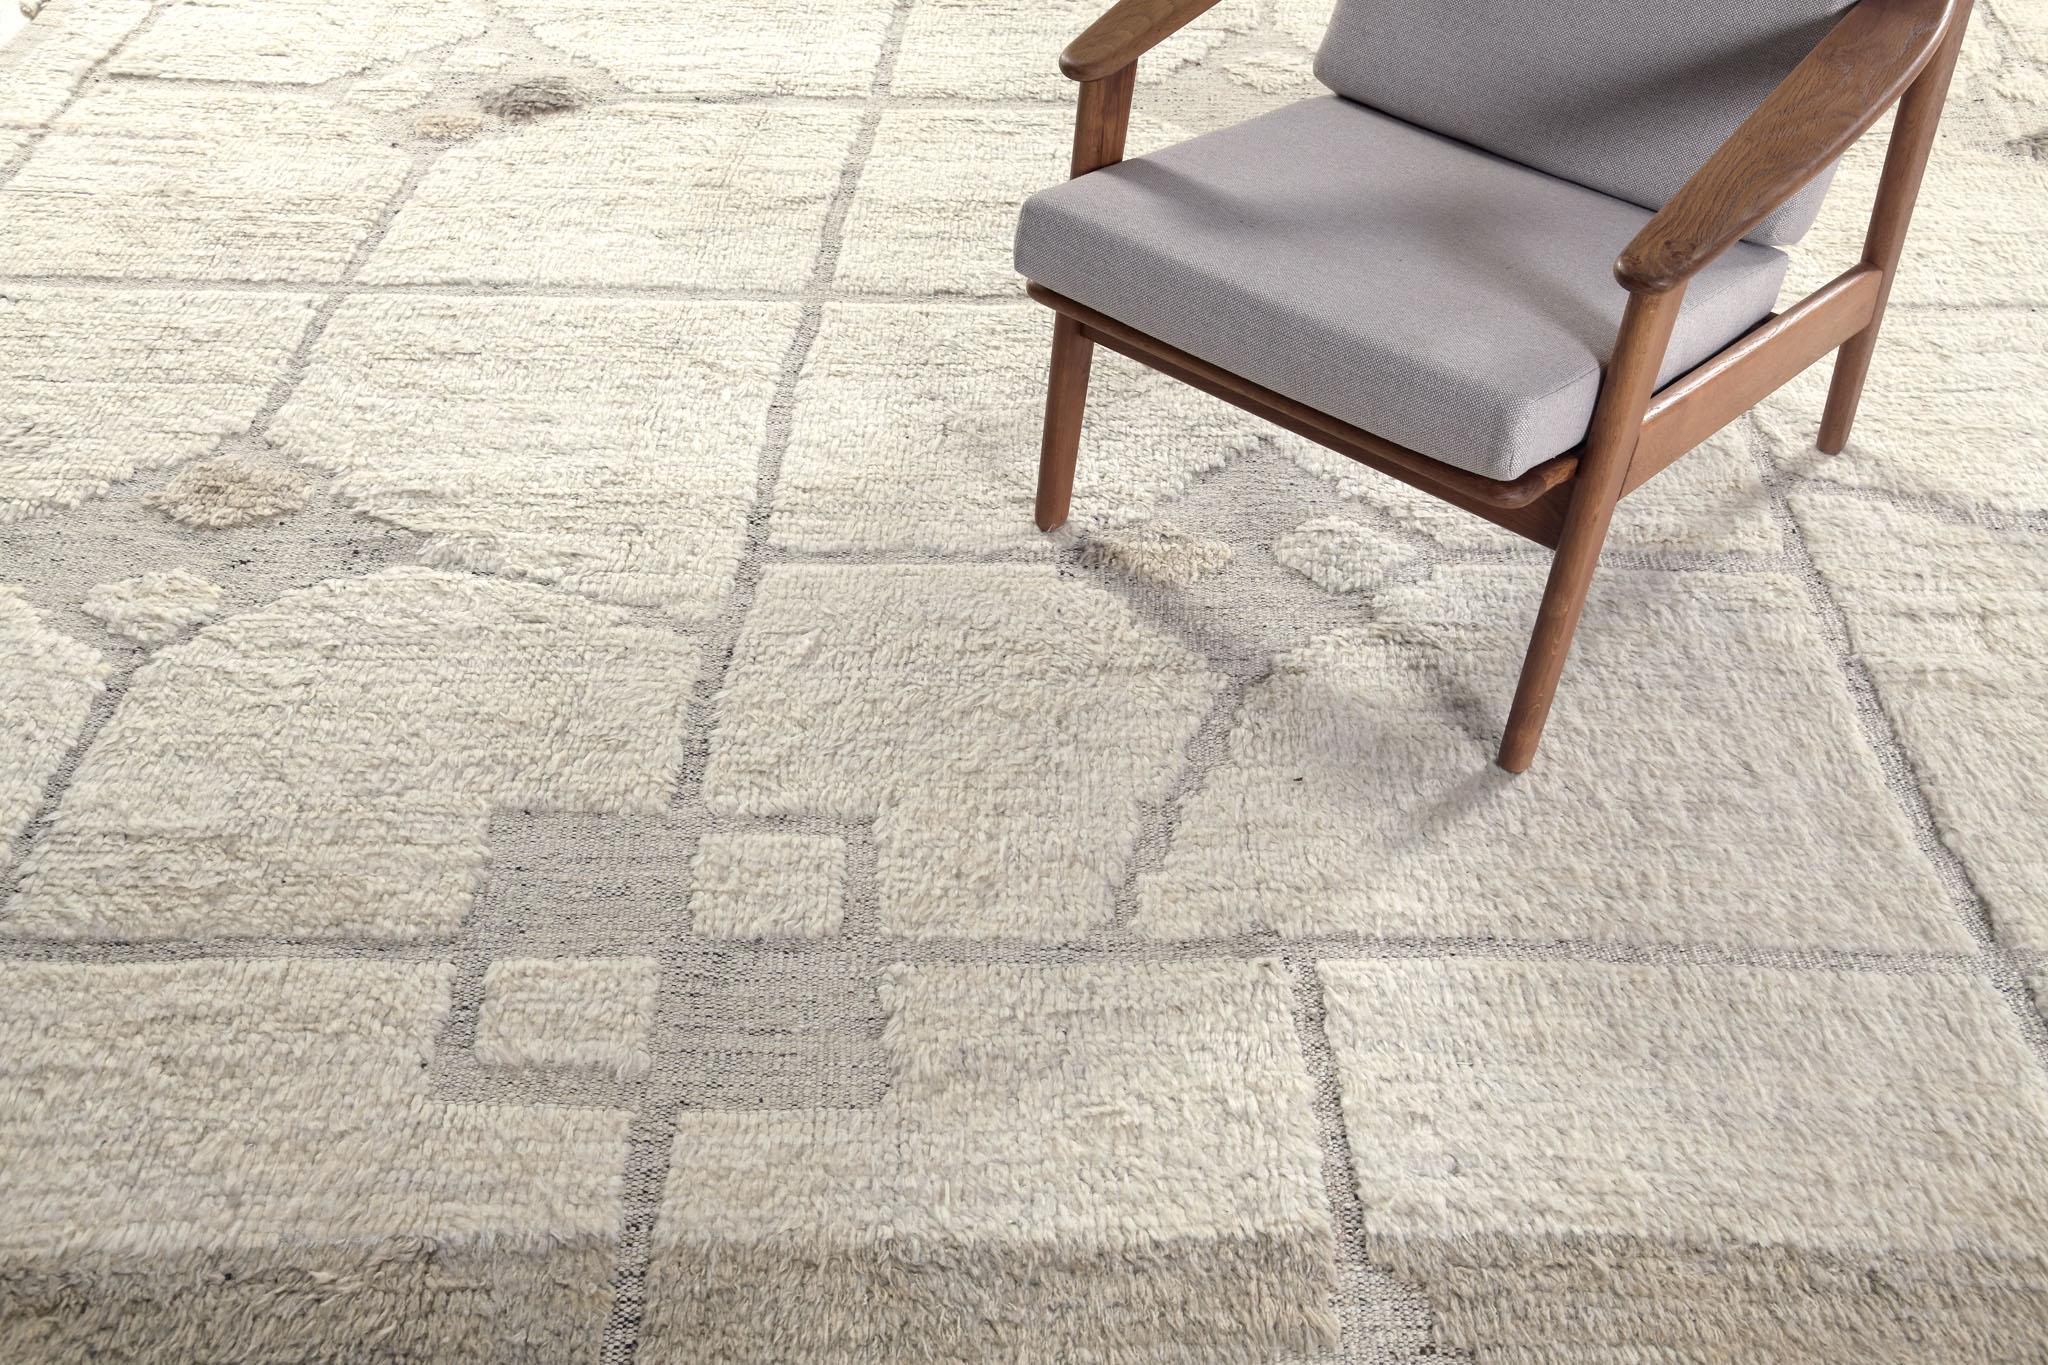 Pirouette is a mesmerizing rug that features a stunning natural color scheme displaying an array of wonderful symbolical motifs and grid patterns. Ivory and light brown play an integral part in illuminating the rug’s overall majestic appearance.